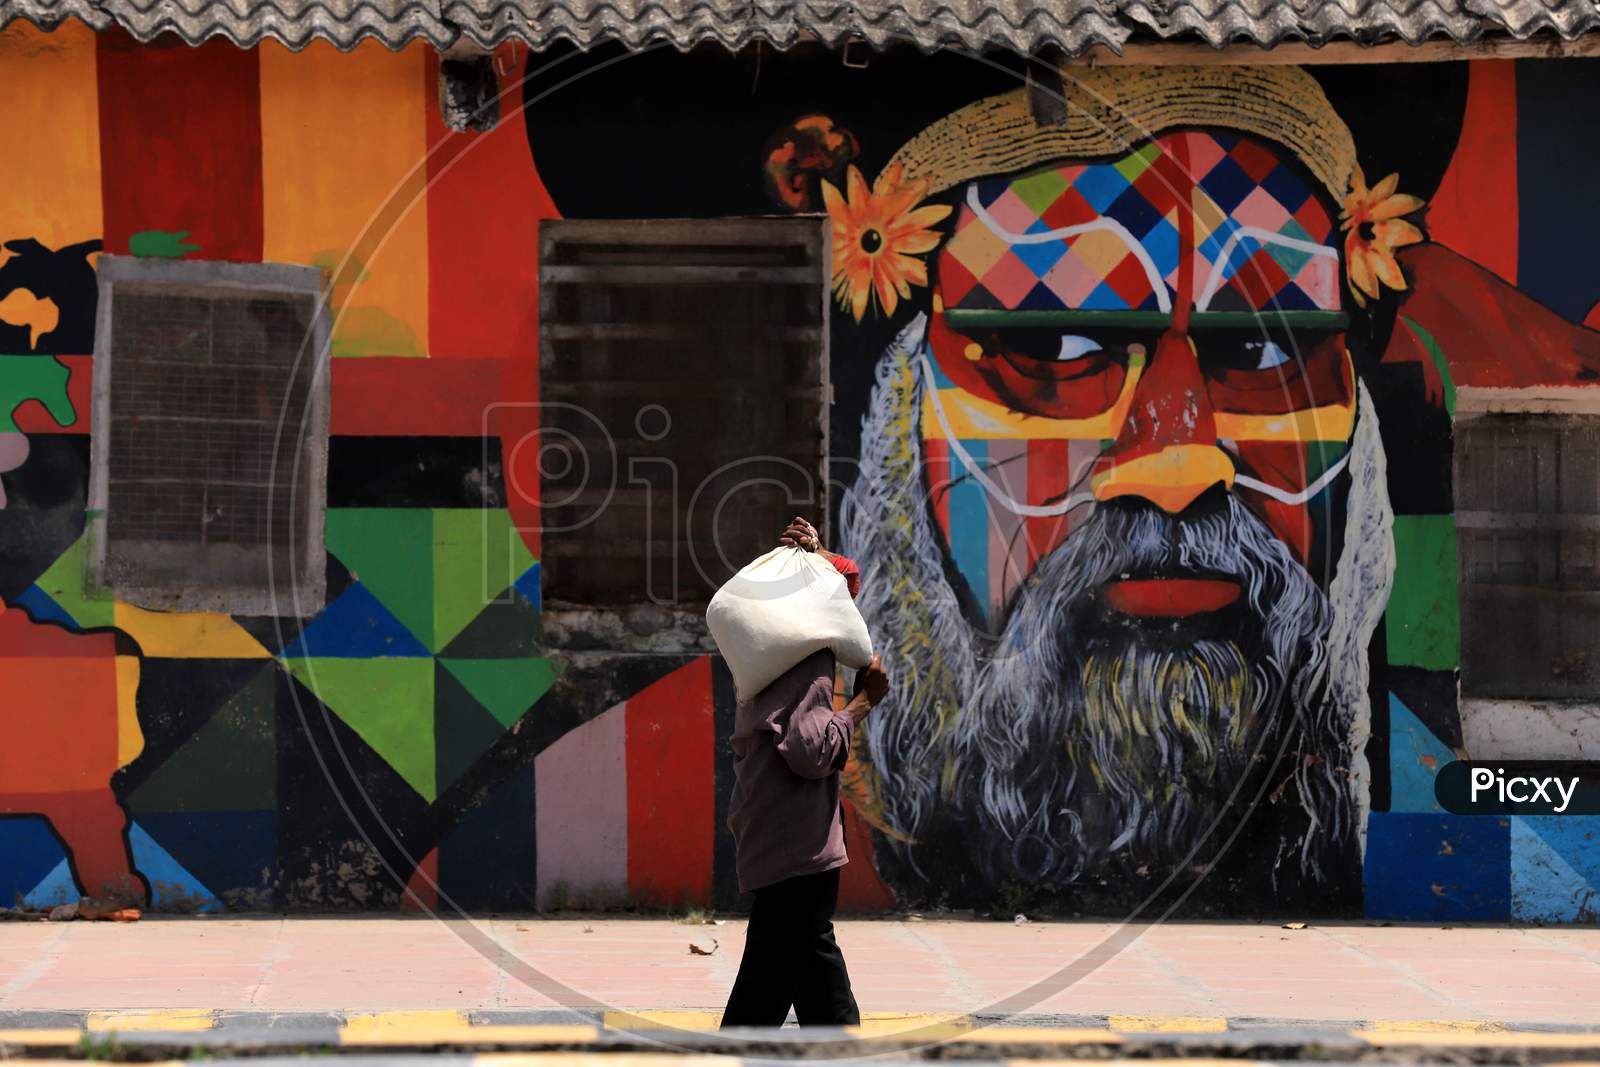 A Man walks past a mural On A Hot Weather day In Prayagraj, May 26, 2020.